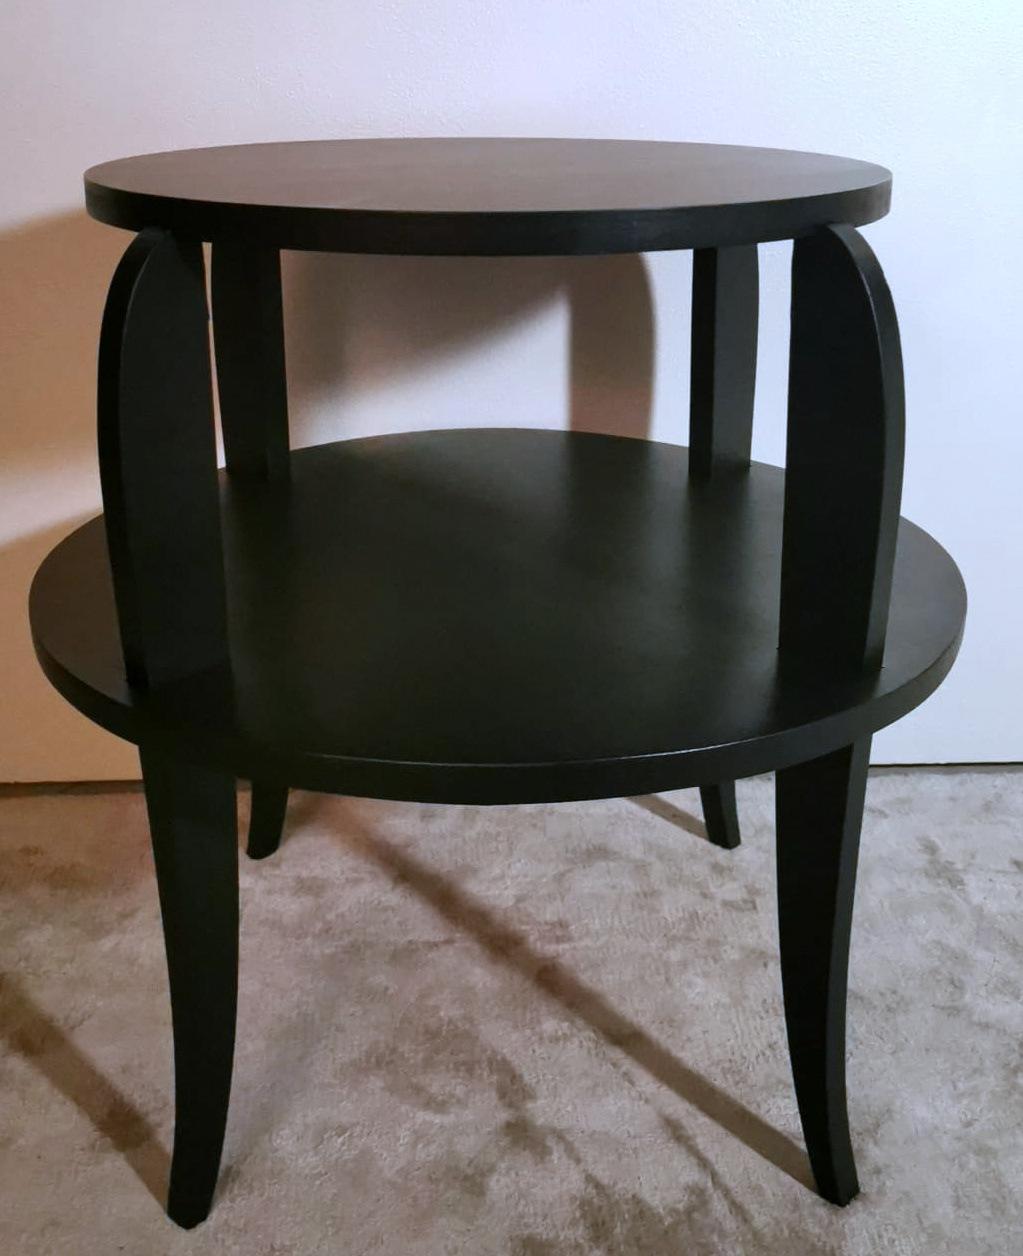 We kindly suggest that you read the whole description, as with it we try to give you detailed technical and historical information to guarantee the authenticity of our objects.
A peculiar and original round French tea/coffee table made of black